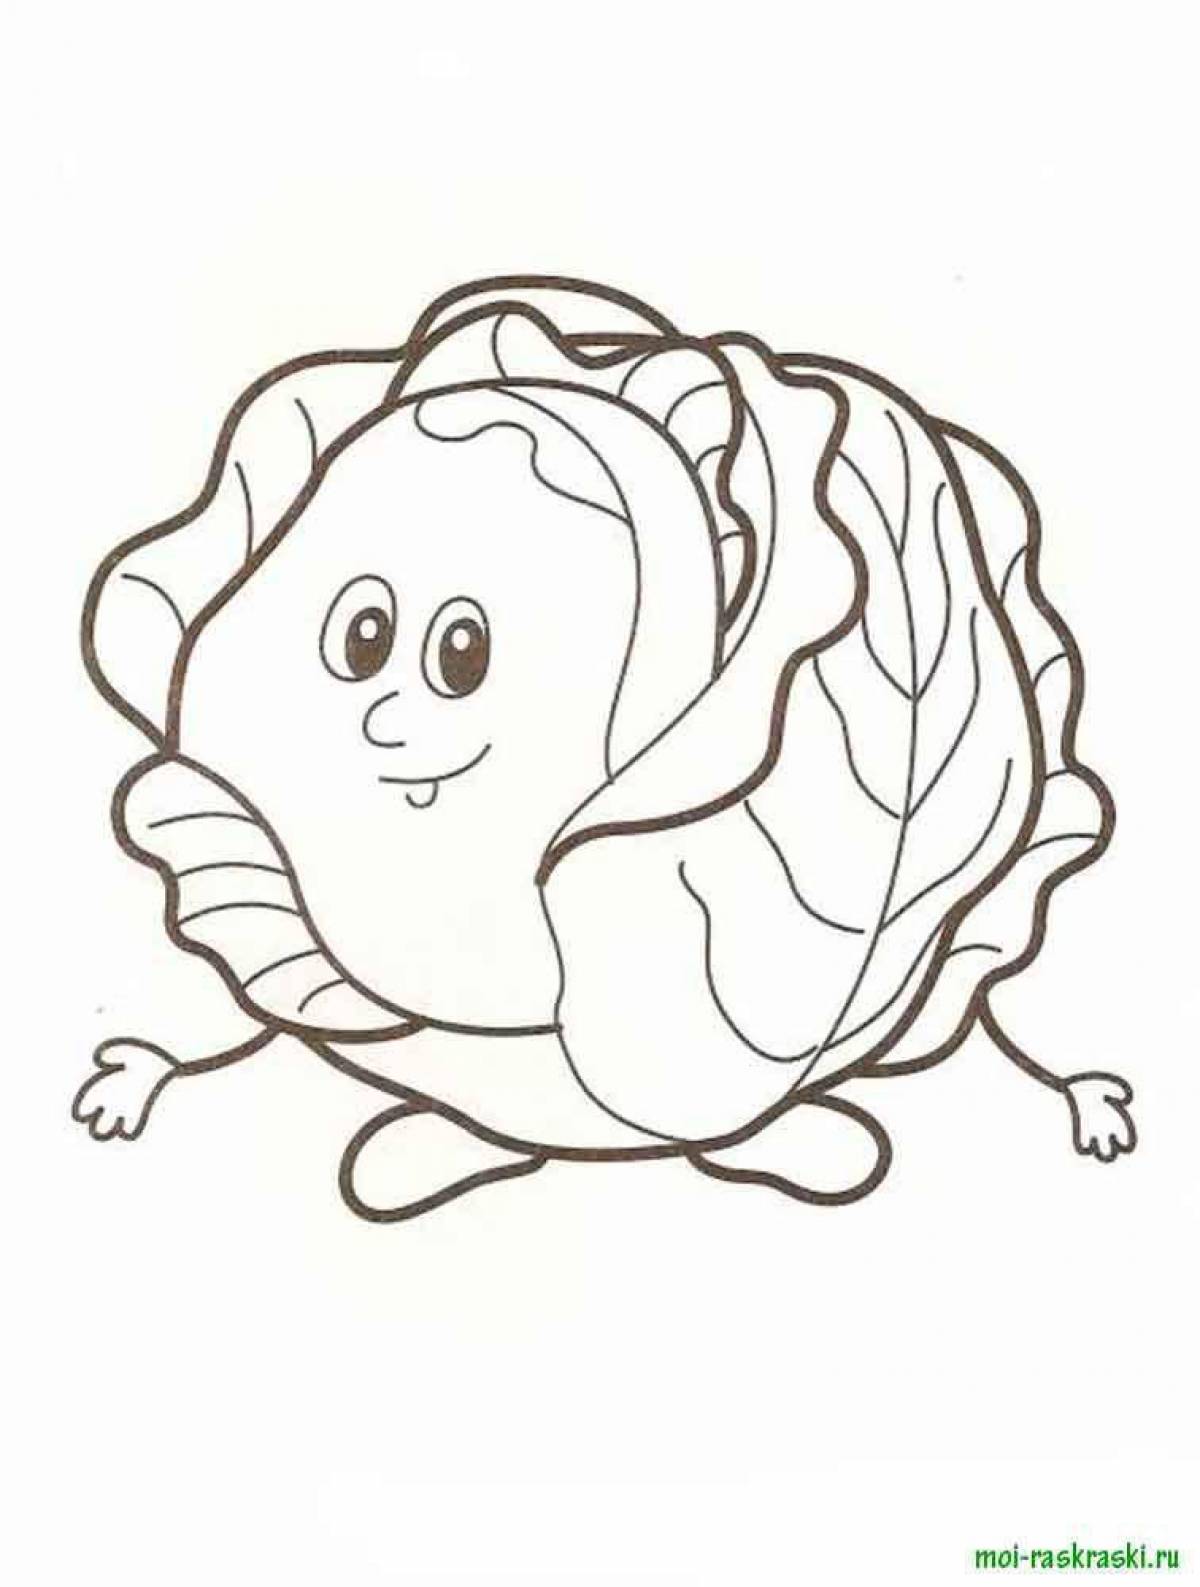 Colorful cabbage coloring book for kids